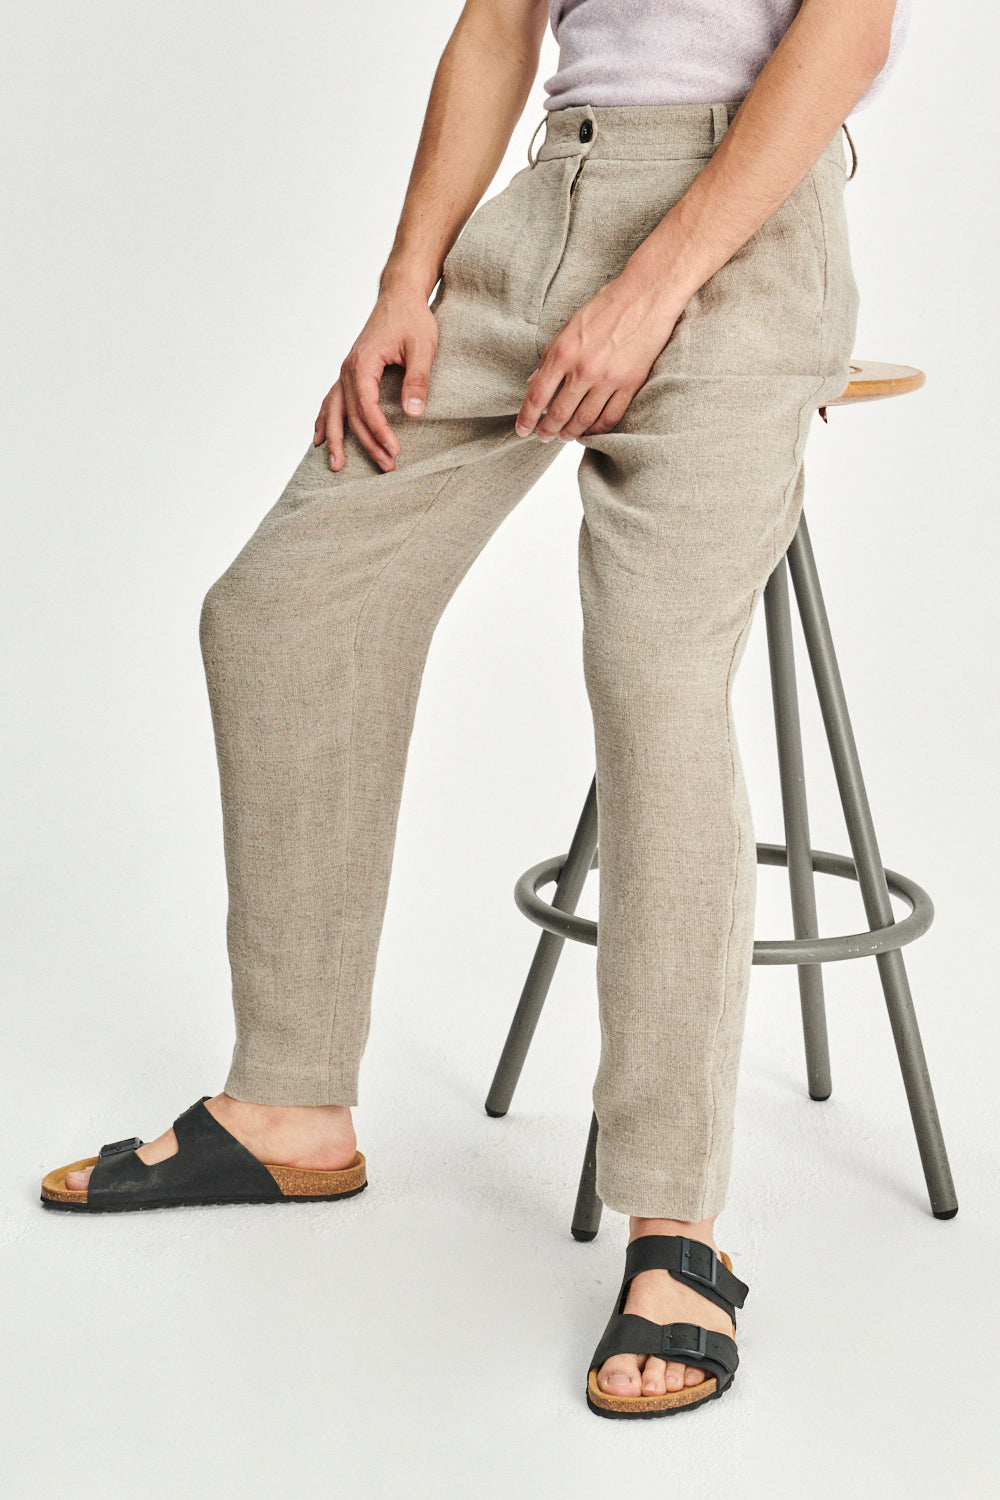 Genuine Trousers in a Beige Fluid and Chunky Italian Linen Crepe